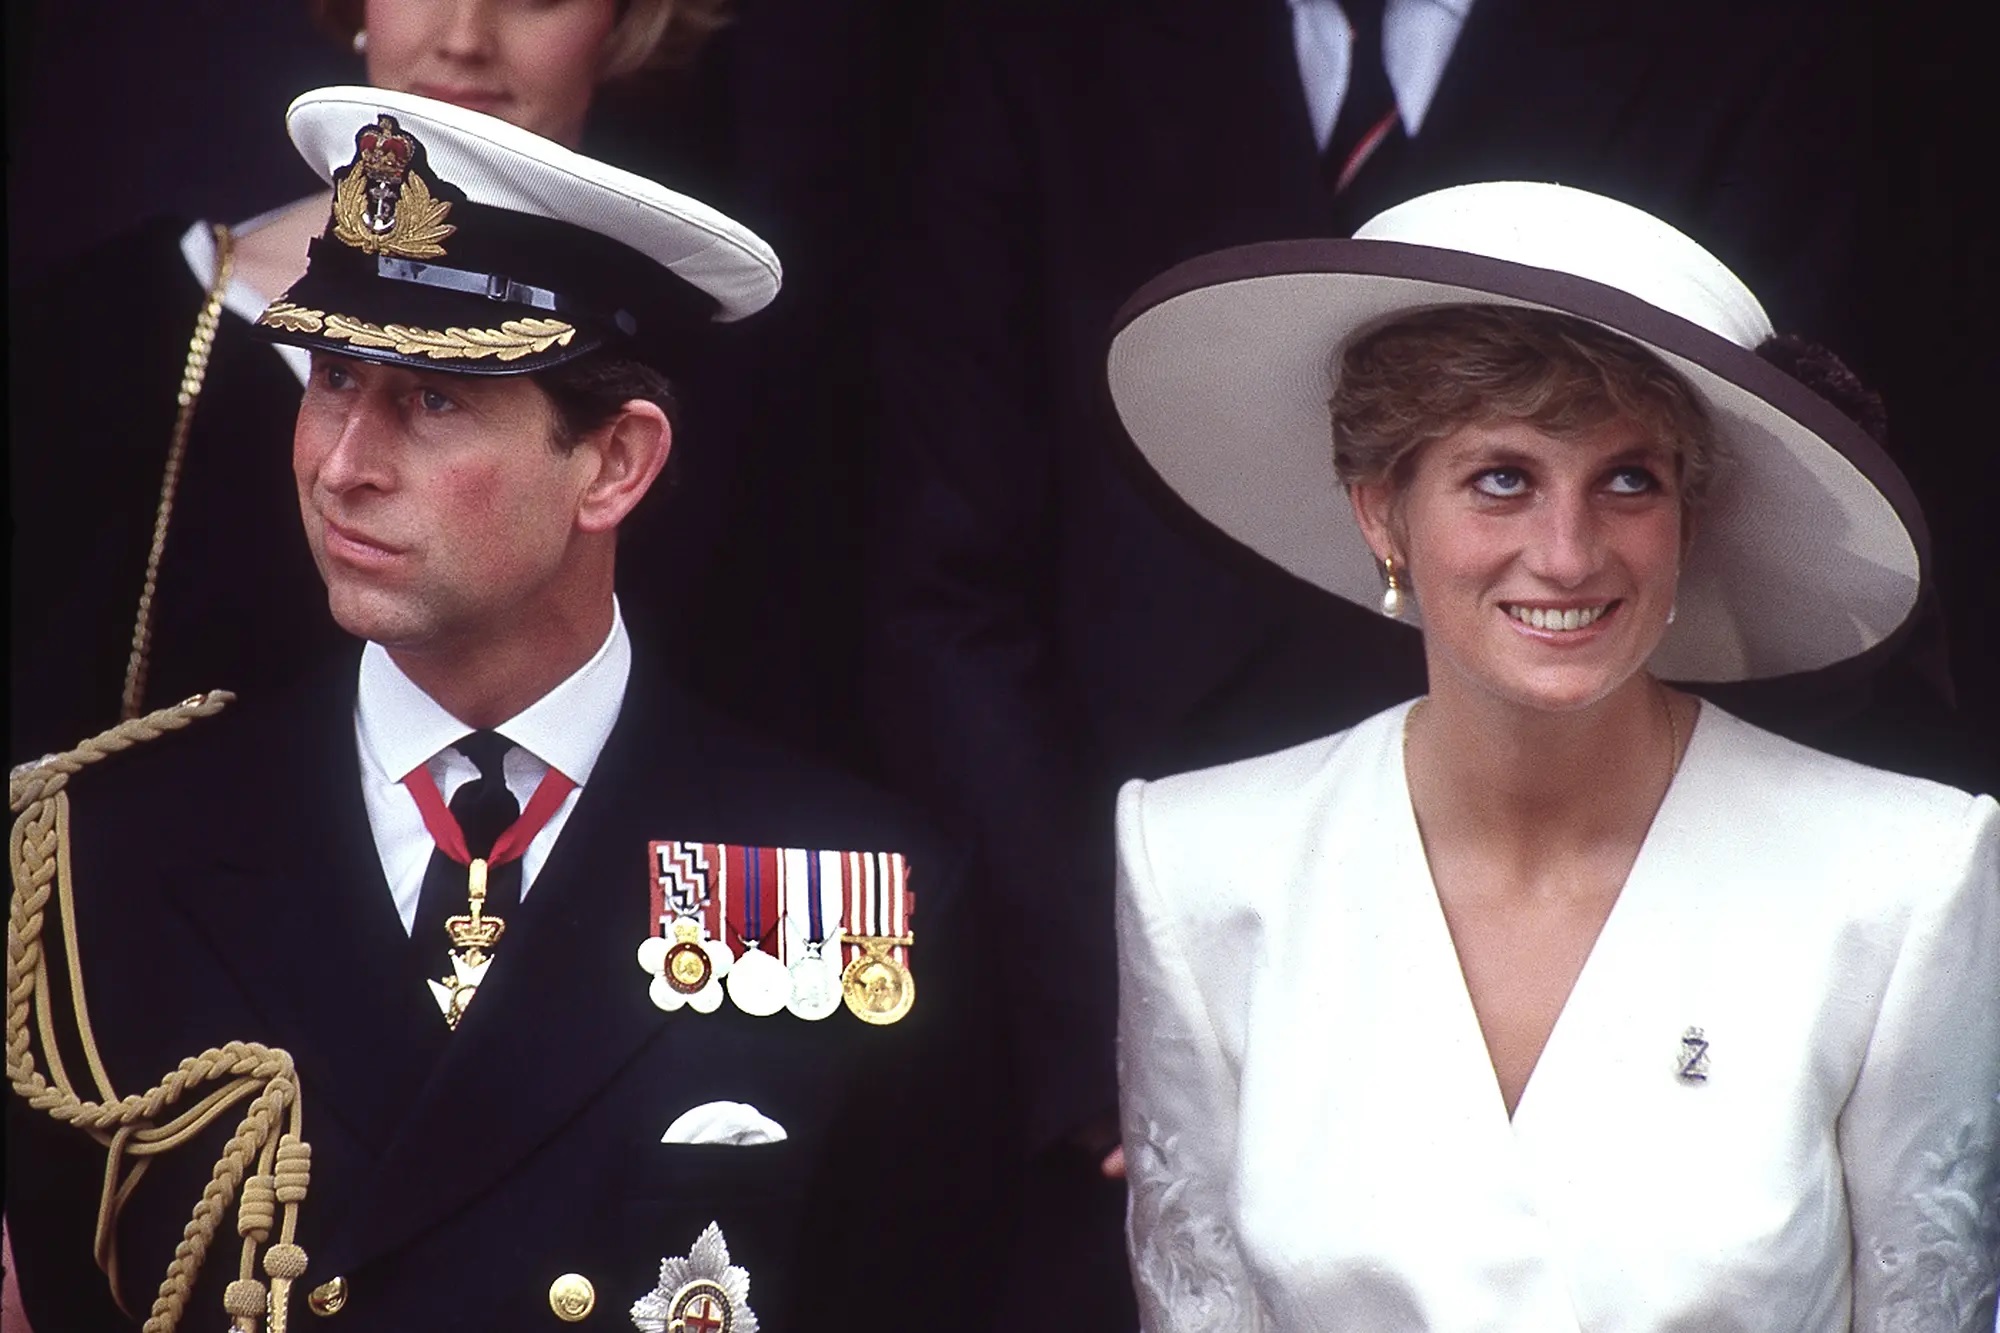 Desperate Diana 'trying to find herself' in year before her tragic death